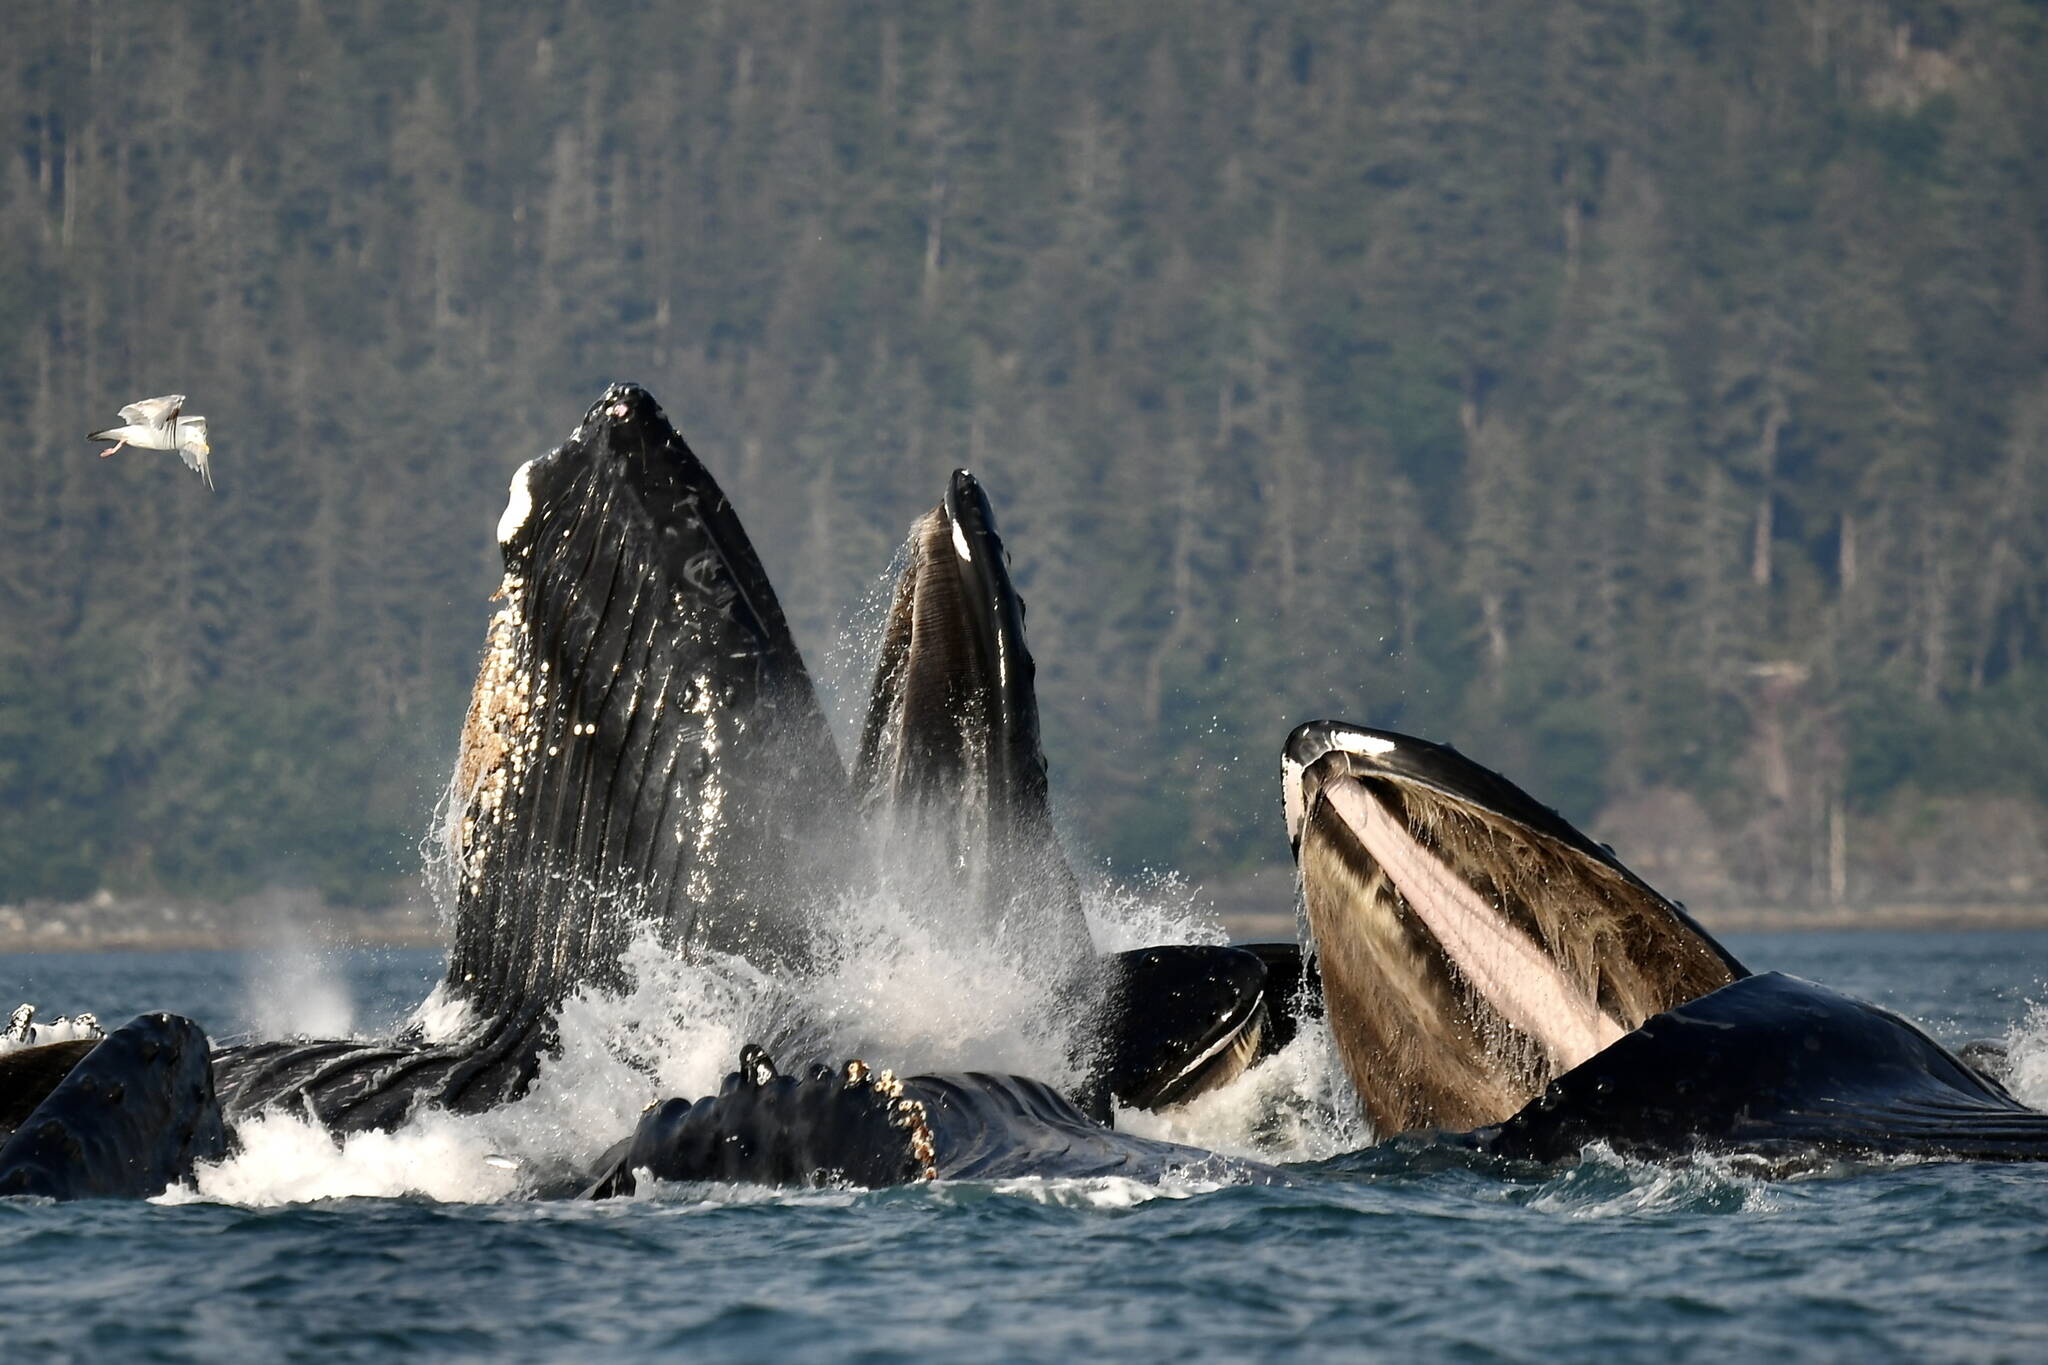 Humpback whales engage in “bubble net” feeding near Juneau on July 31. (Photo by Christopher Grau)